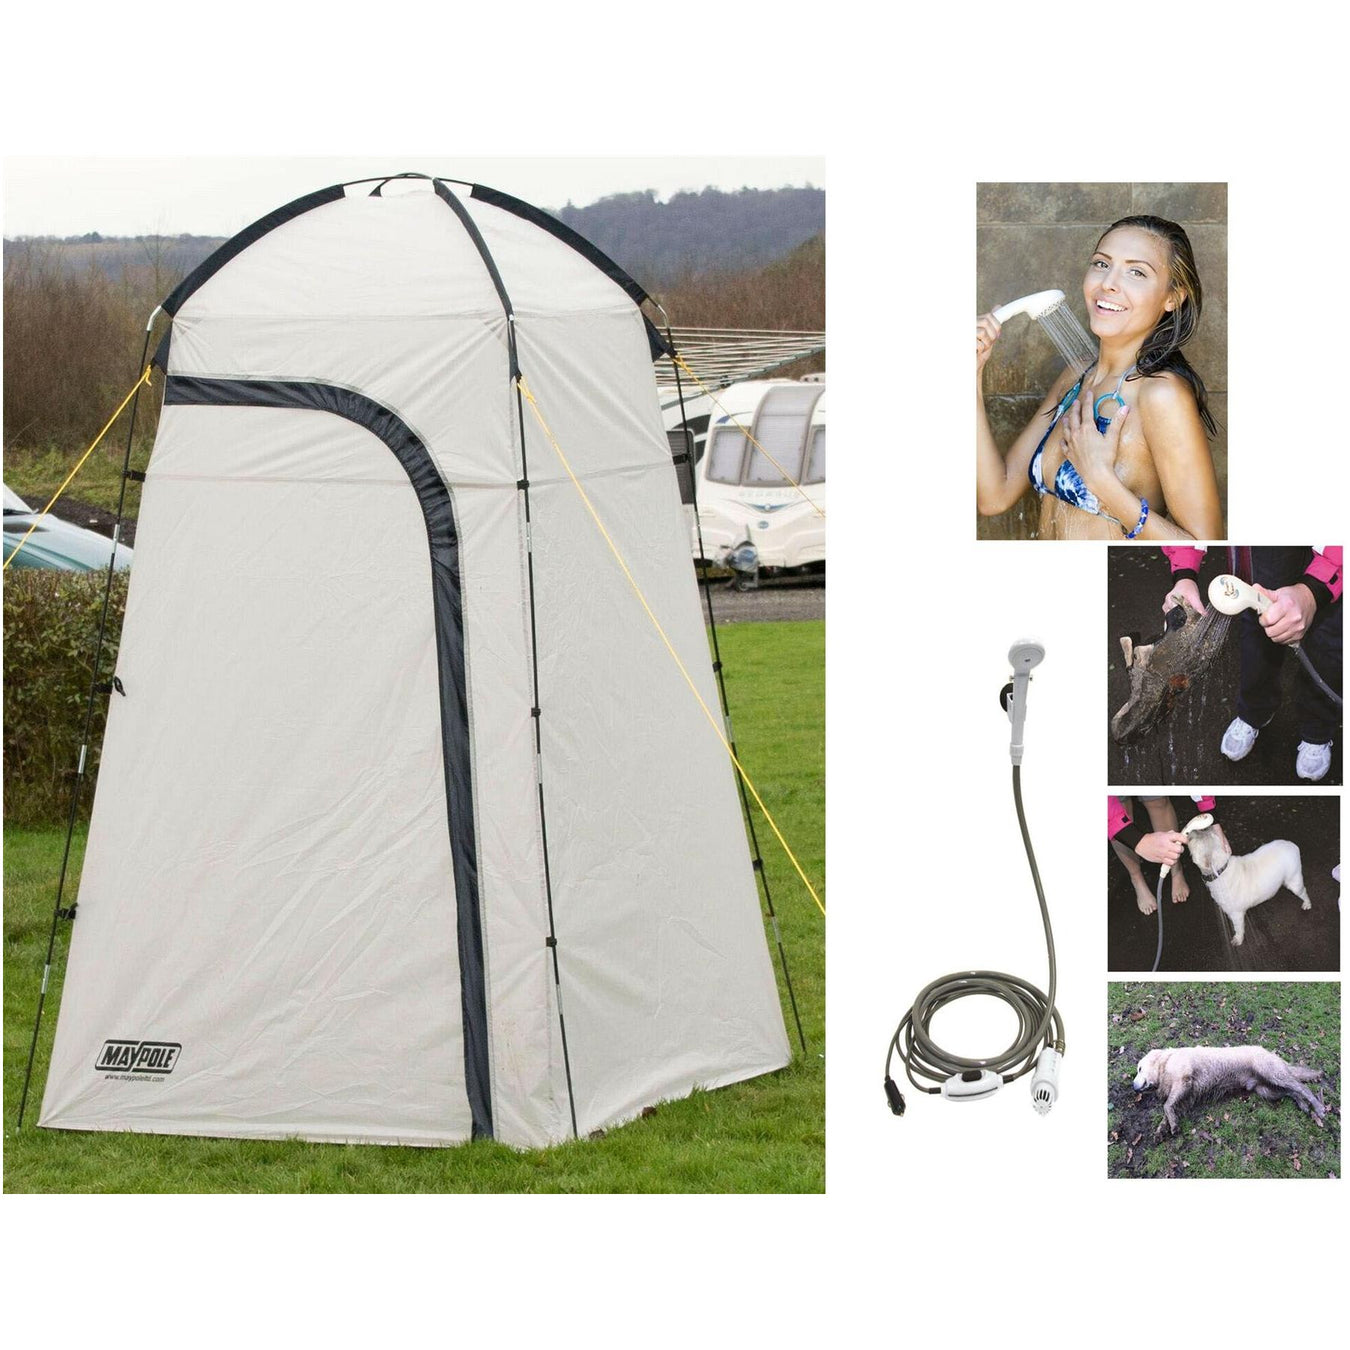 Streetwize 12v Porta Shower Portable 12 volt Camping Caravan & Shower Tent - UK Camping And Leisure